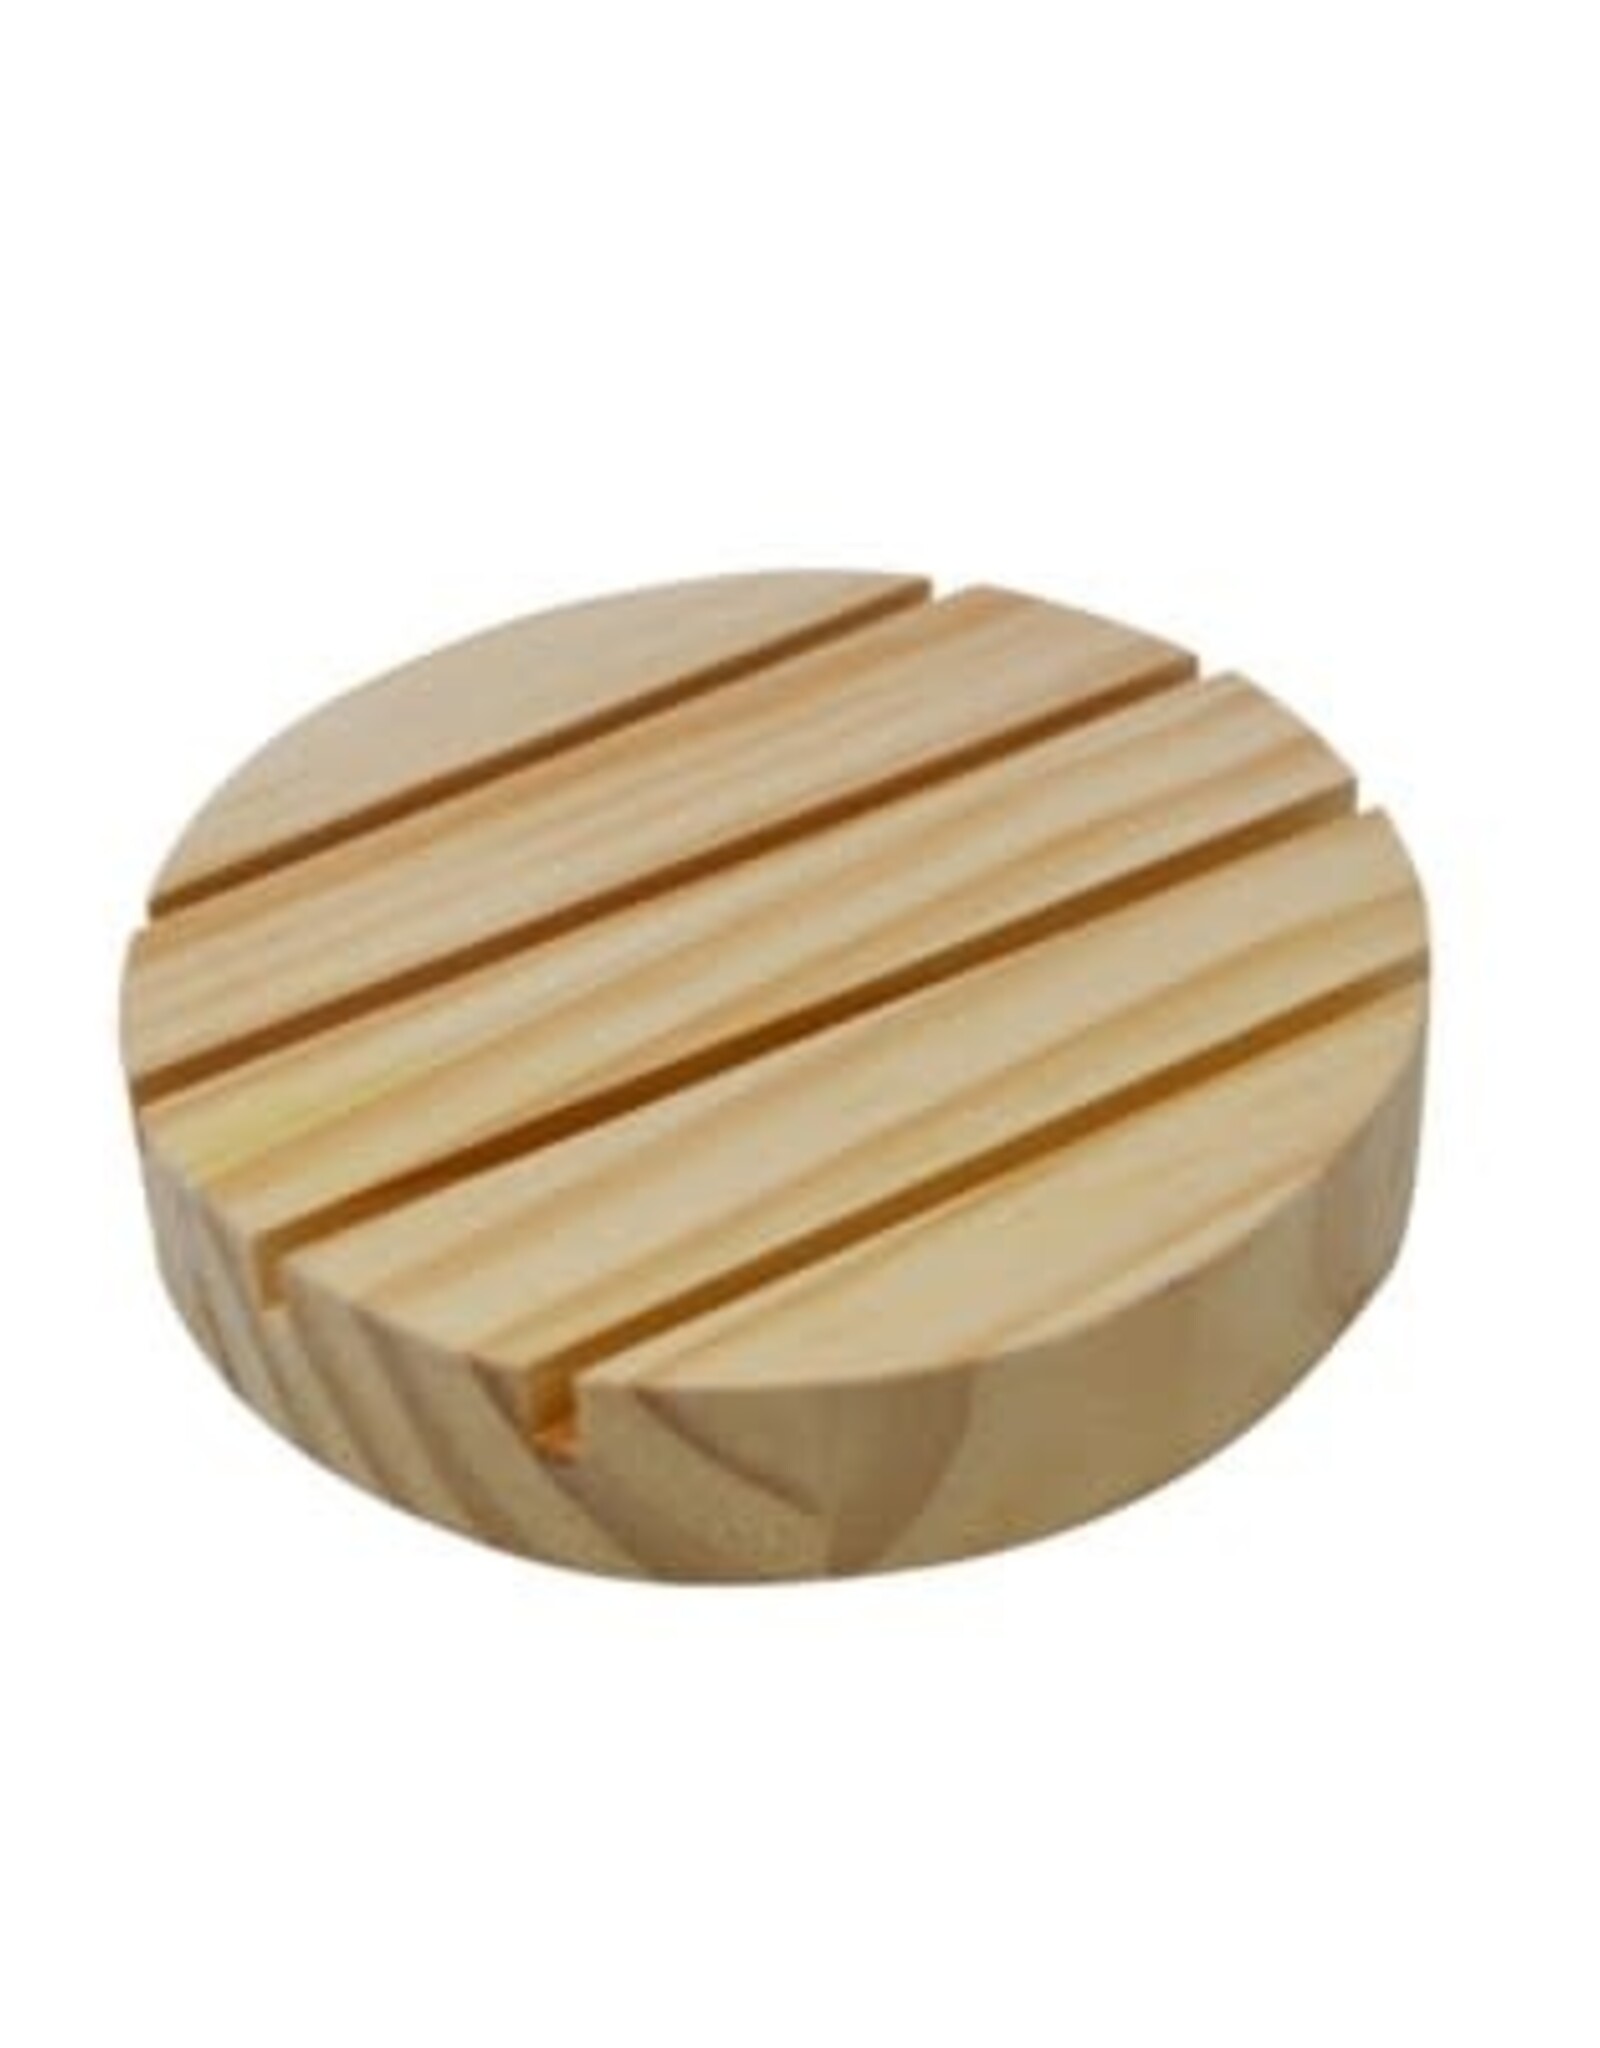 NIA -  Round Wooden Soap Dish